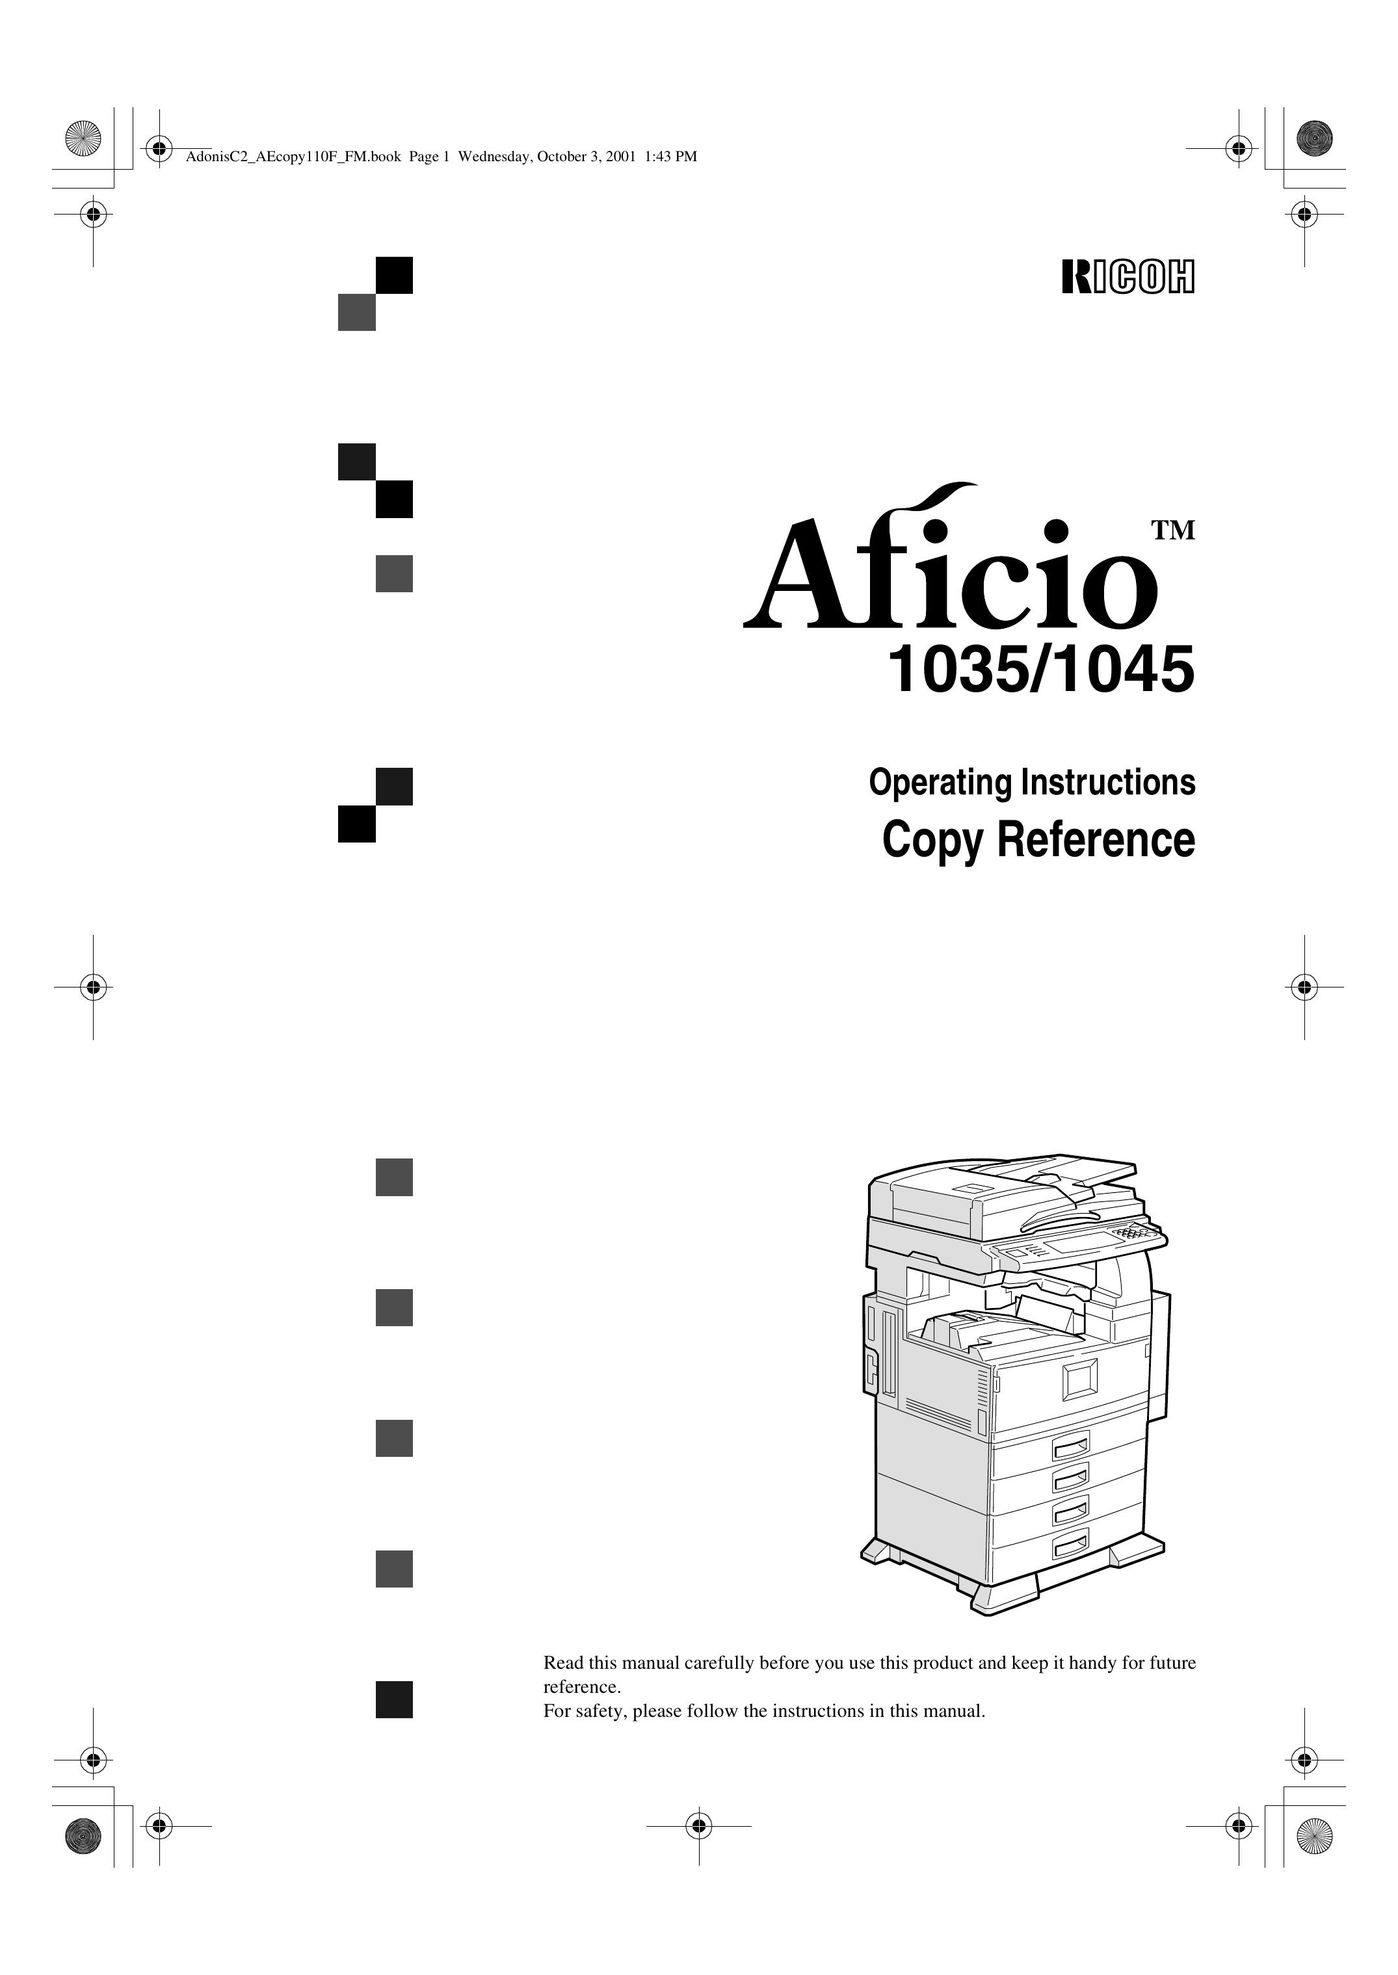 Ricoh 1045 All in One Printer User Manual